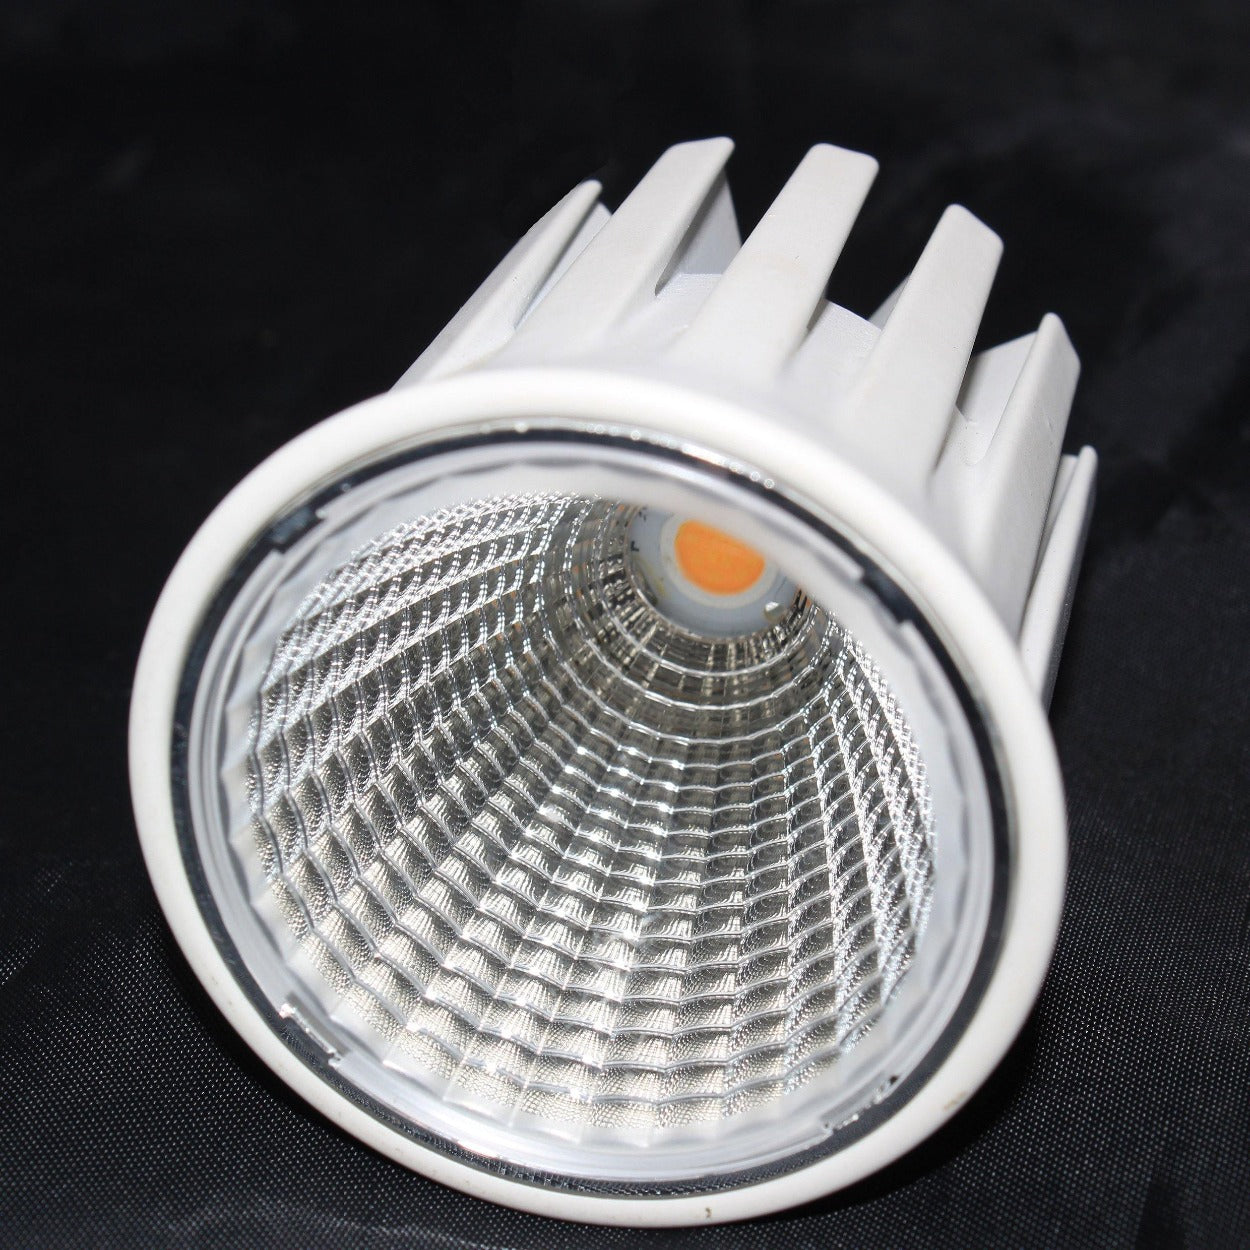 ANKUR GU10 LED MODULE LAMP at the lowest price in India.